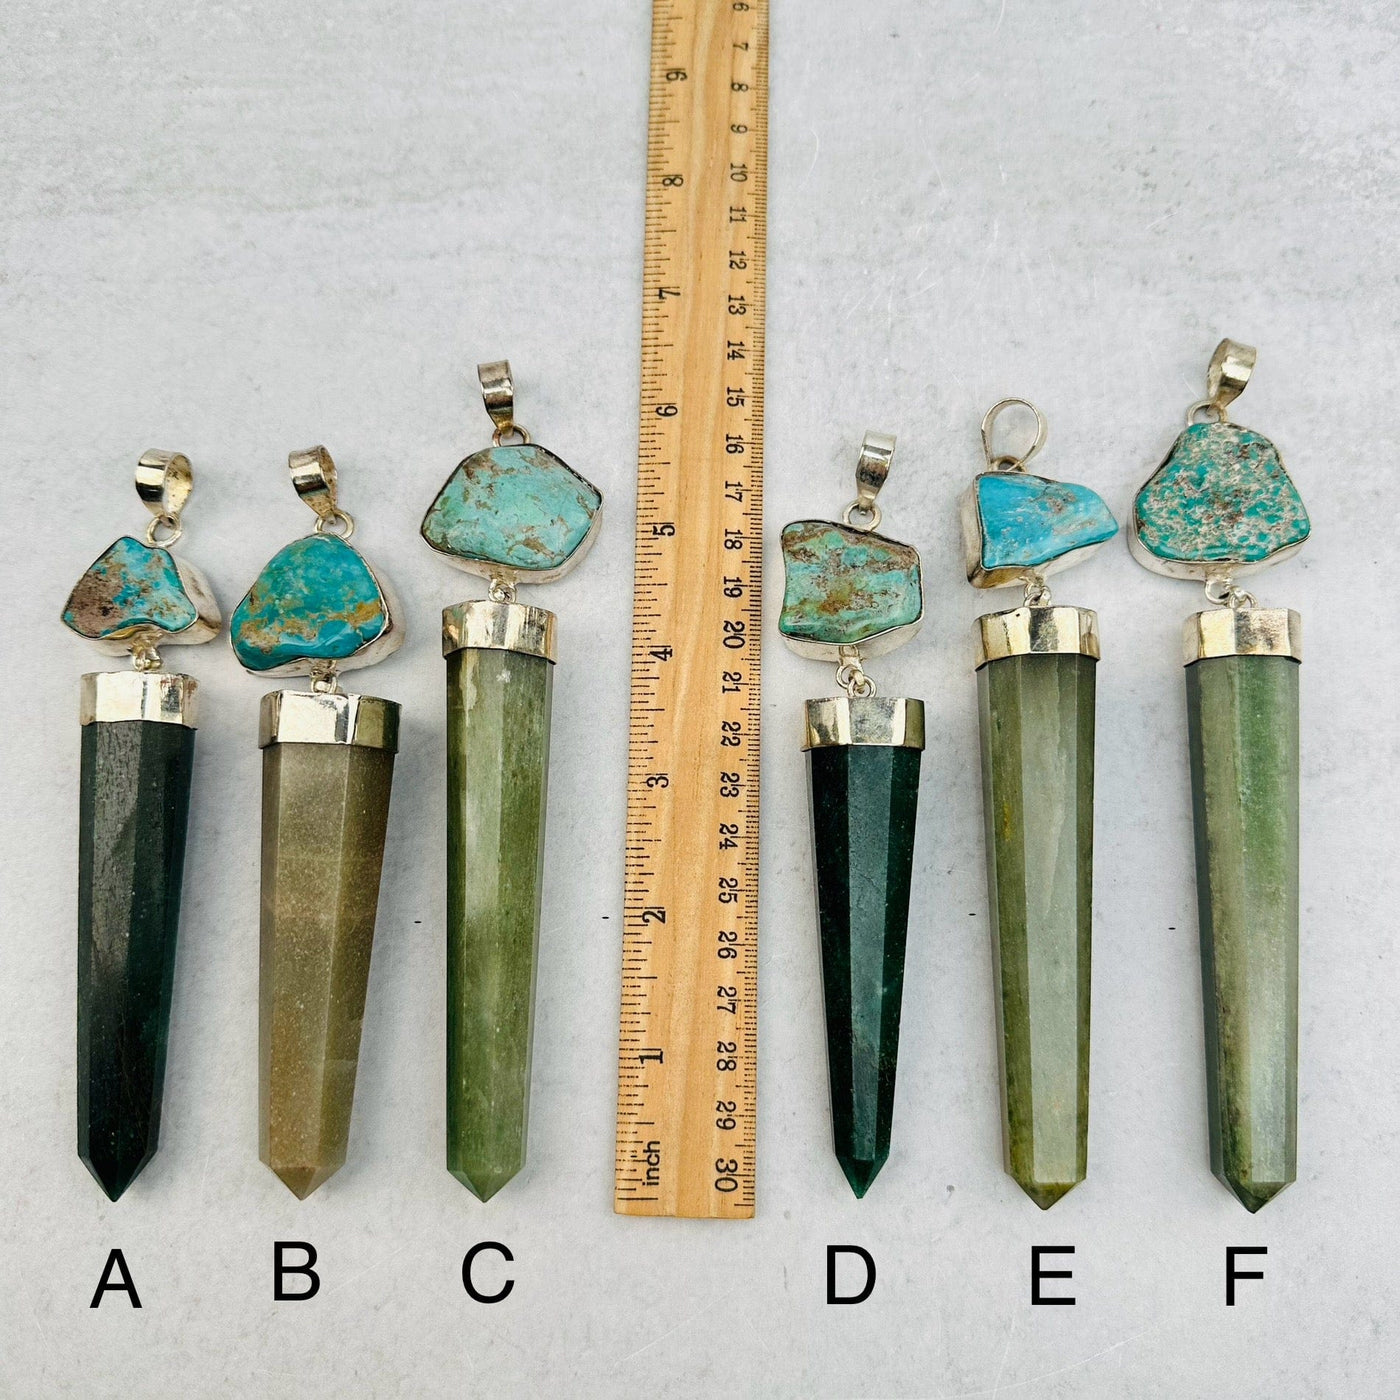 you select your favorite one, pendants next to a ruler for size reference 